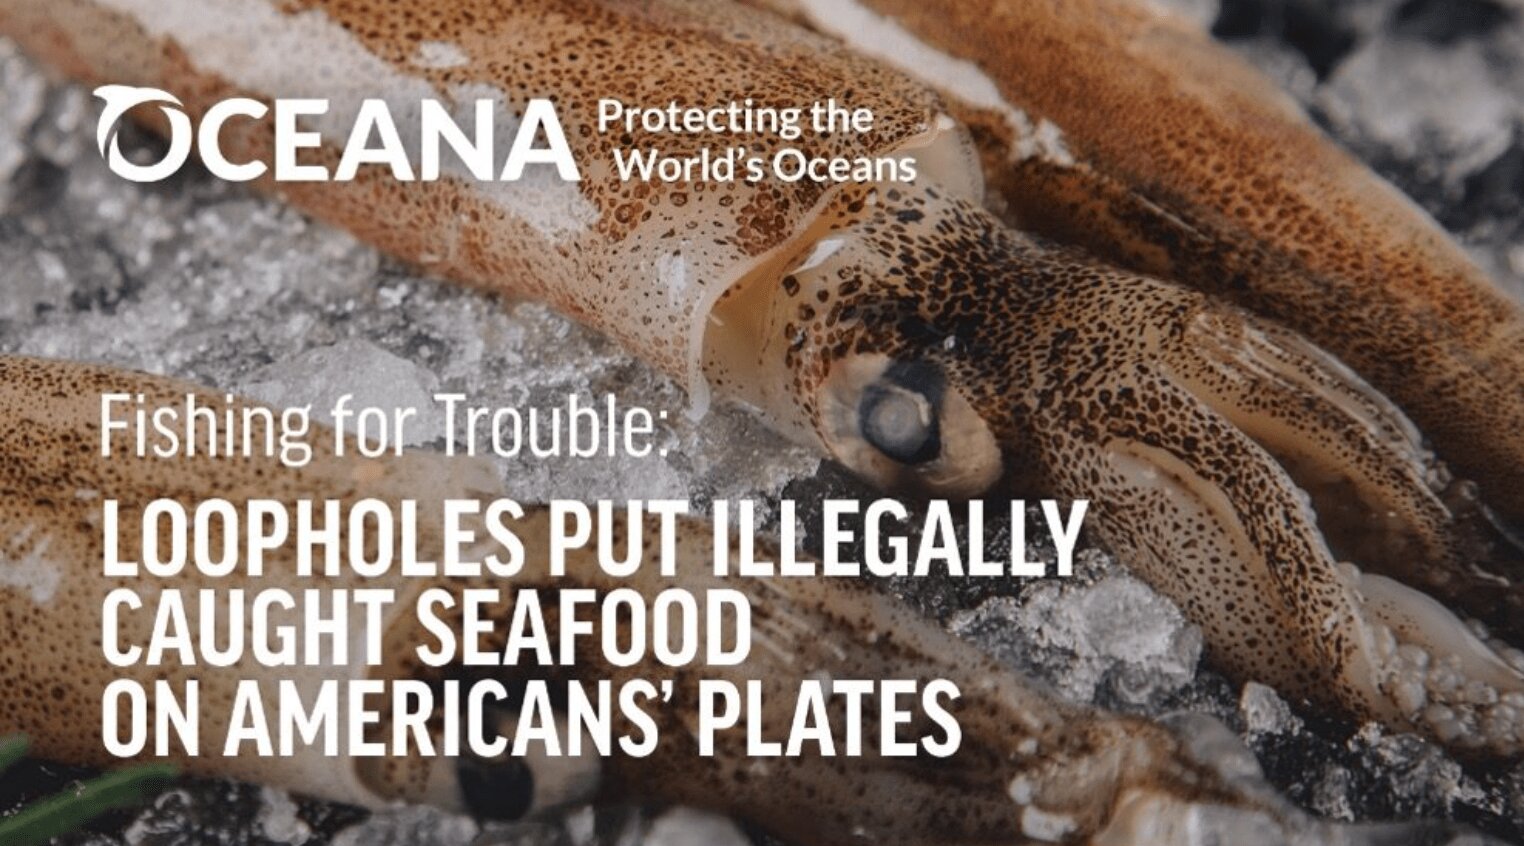 Fishing for Trouble: Loopholes Put Illegally Caught Seafood on Americans’ Plates